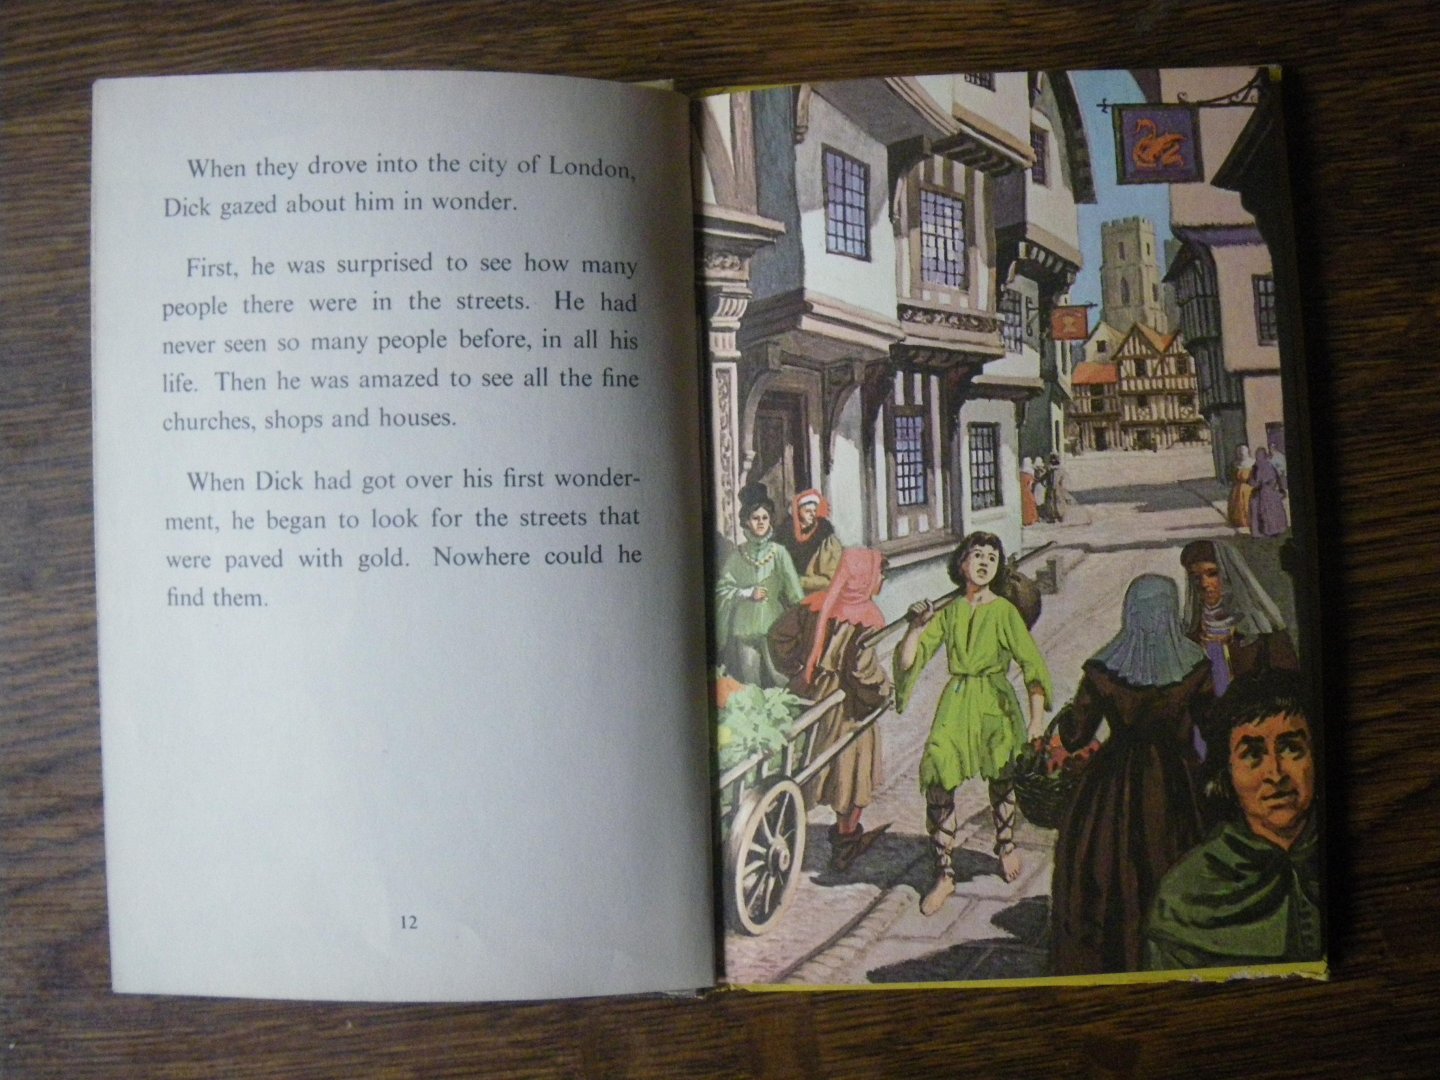 retold by Vera Southgate - Dick Whittington and His Cat (Well Loved Tales)